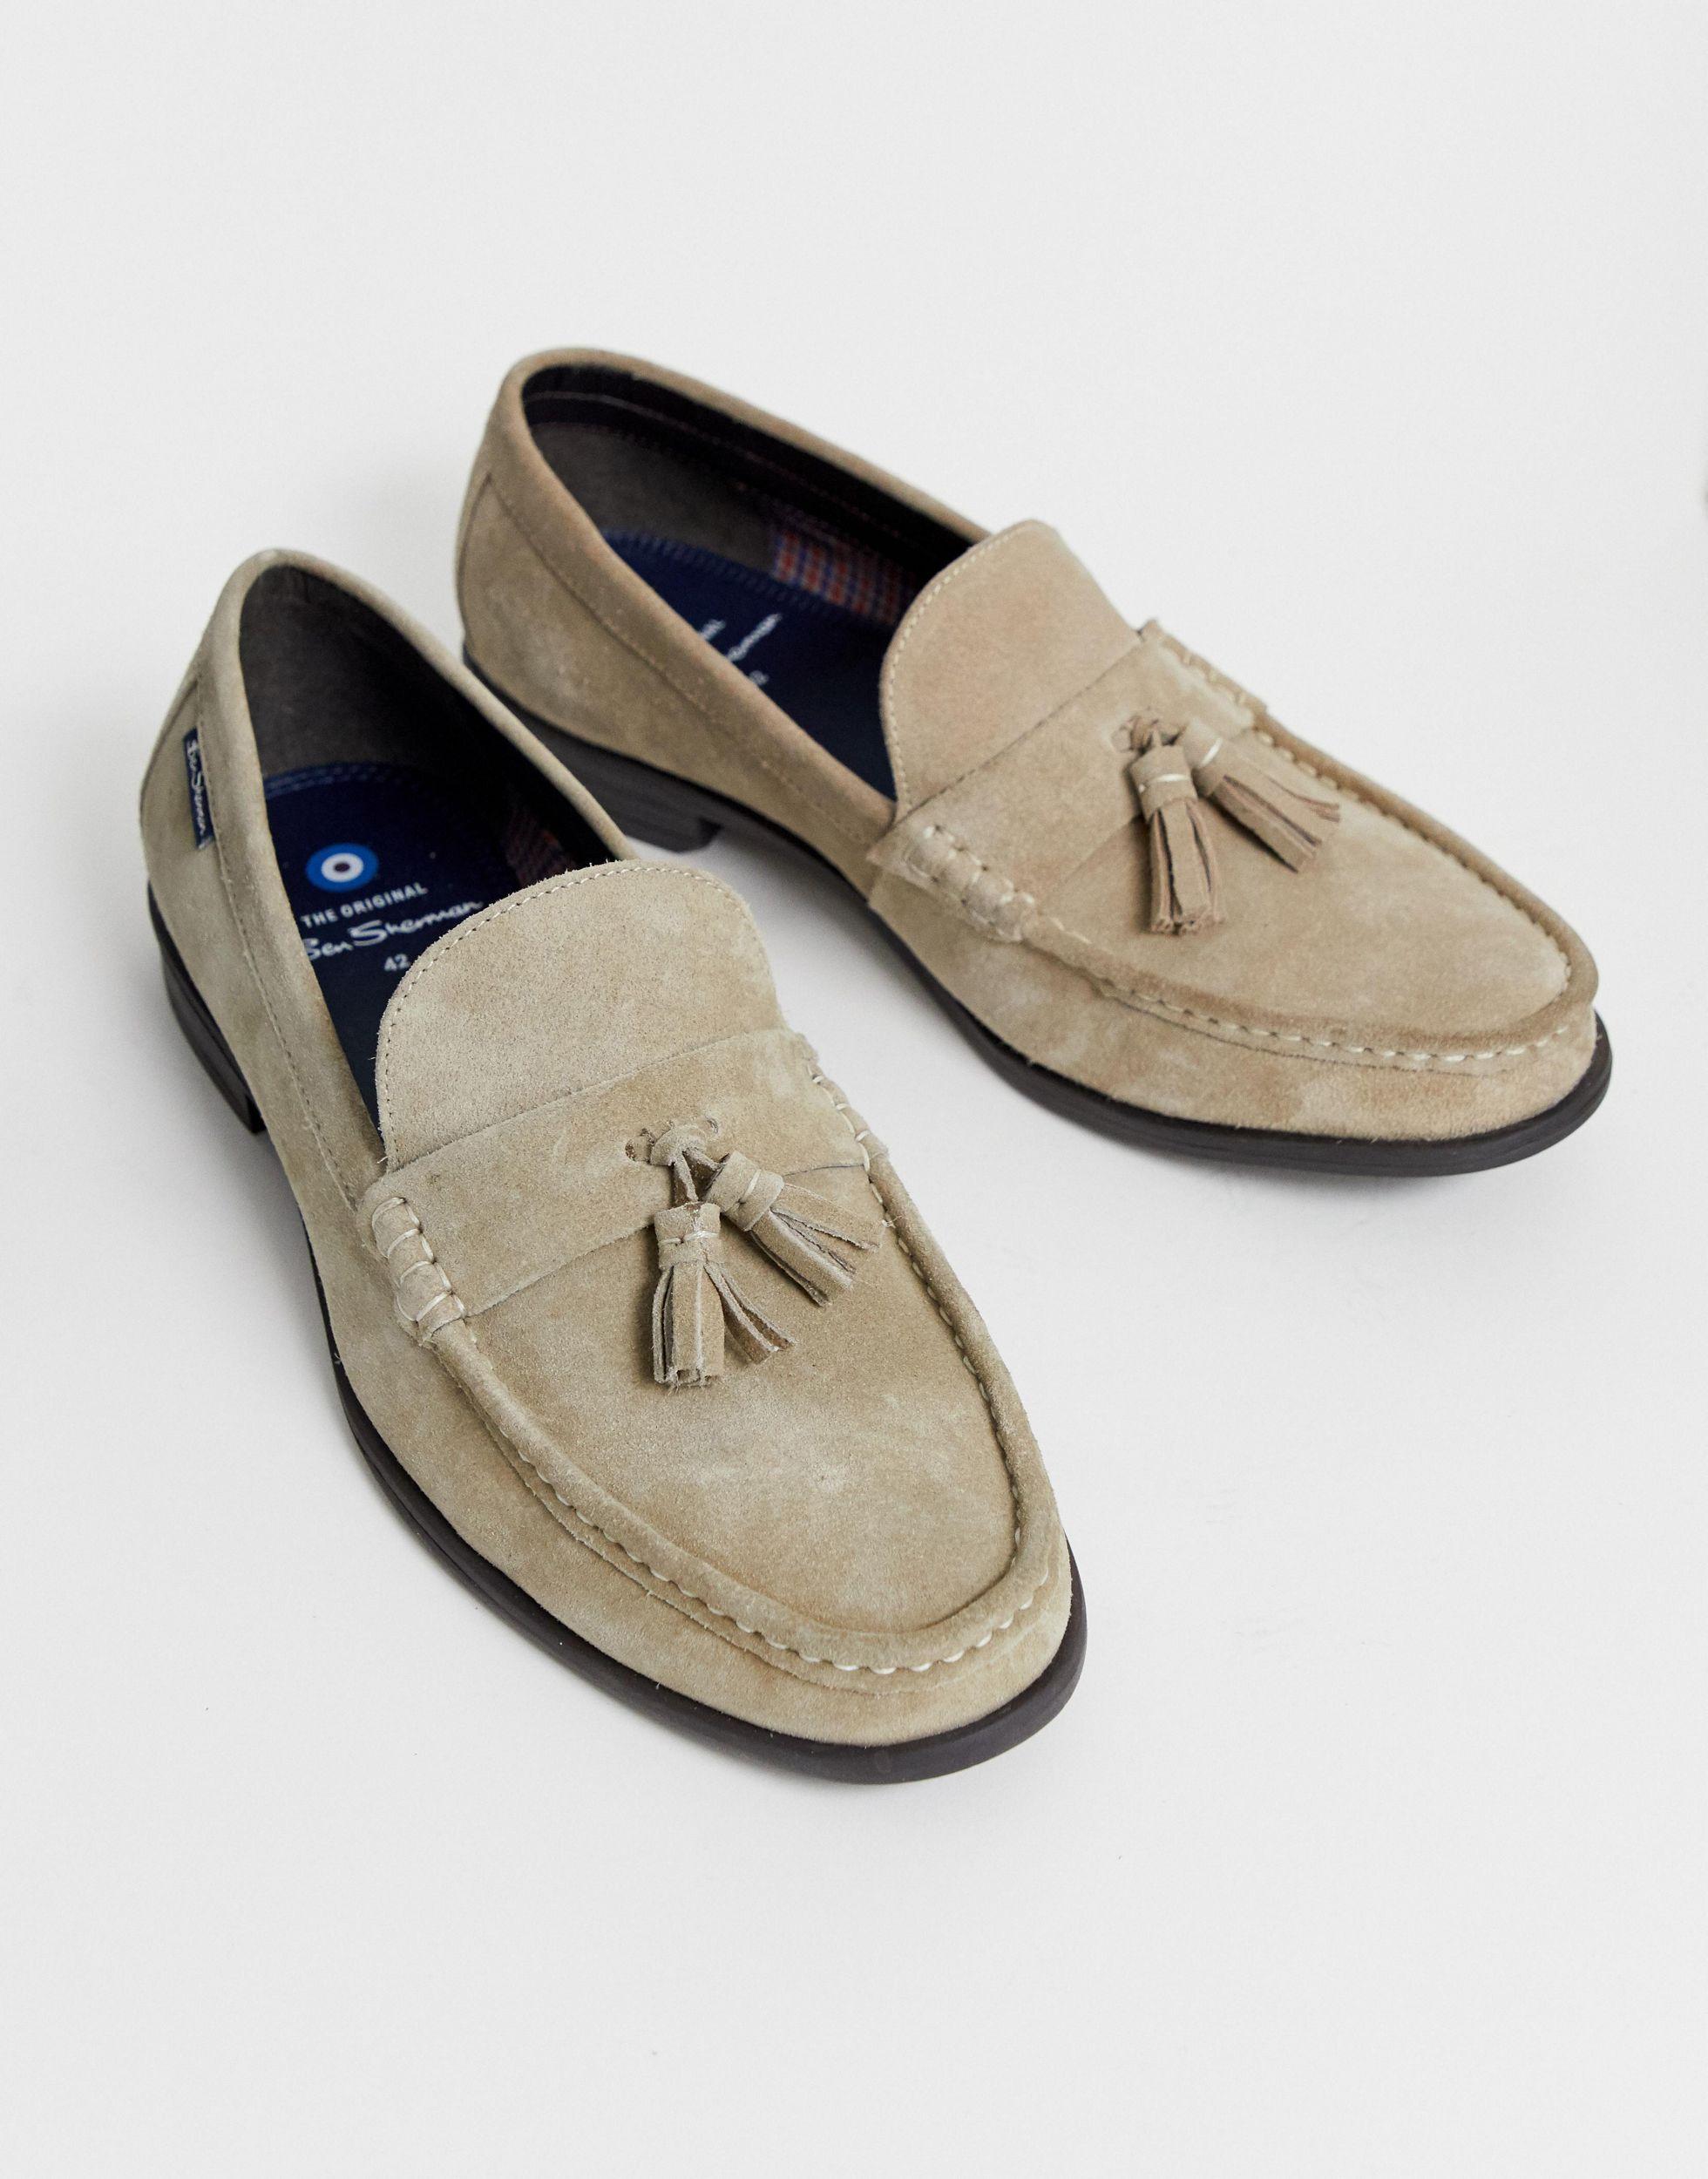 Ben Sherman Suede Loafers Hotsell, SAVE 43% - lutheranems.com